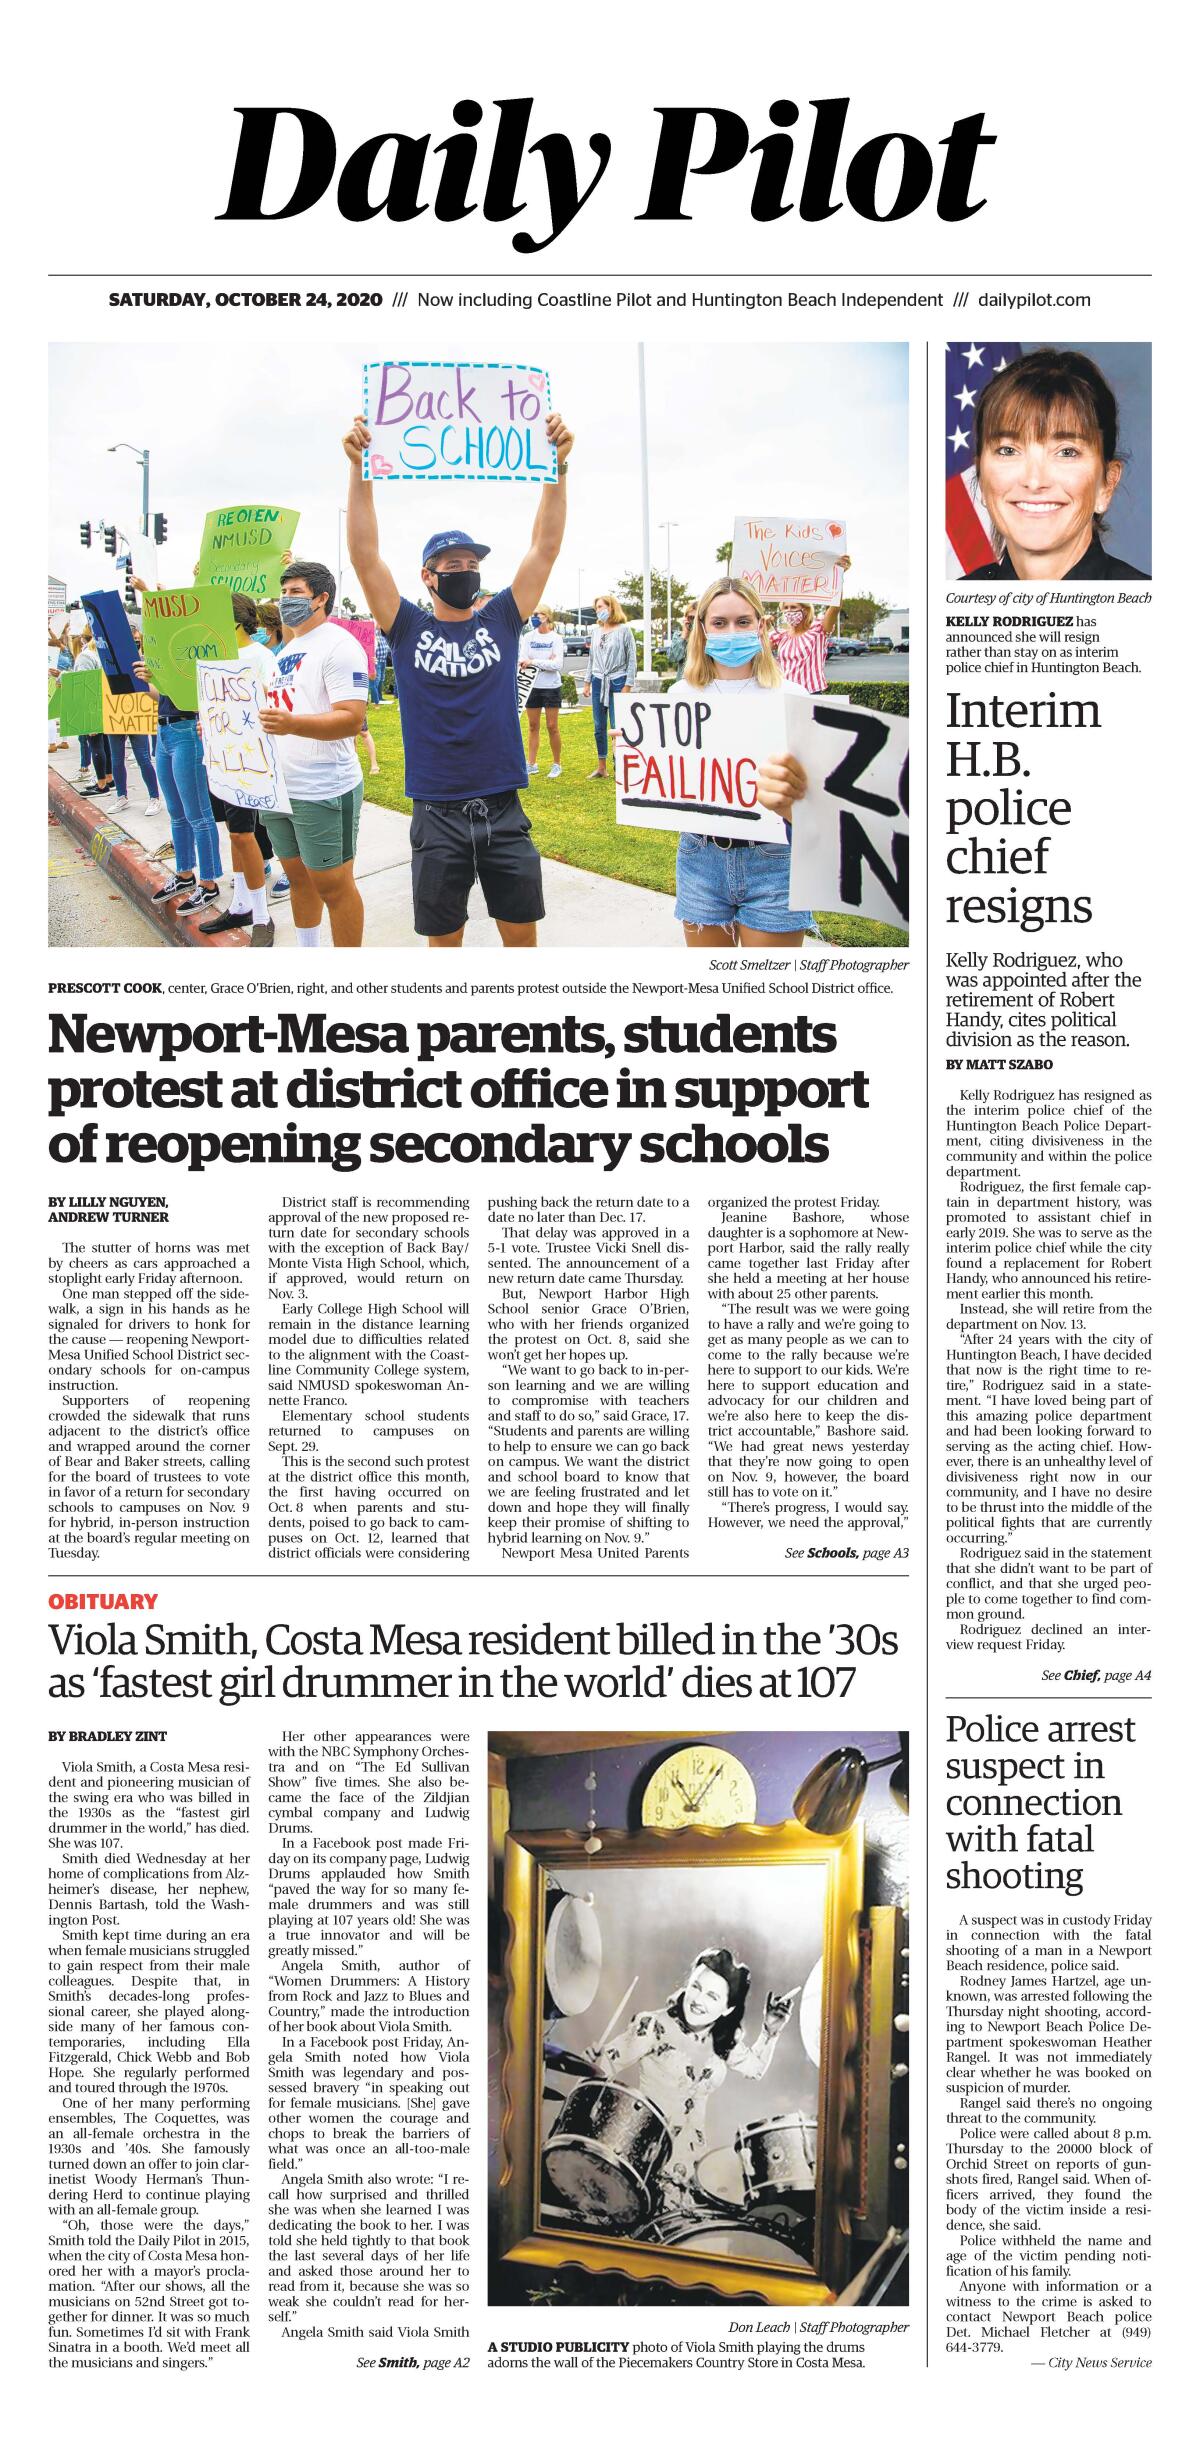 Front page of Daily Pilot e-newspaper for Saturday, Oct. 24, 2020